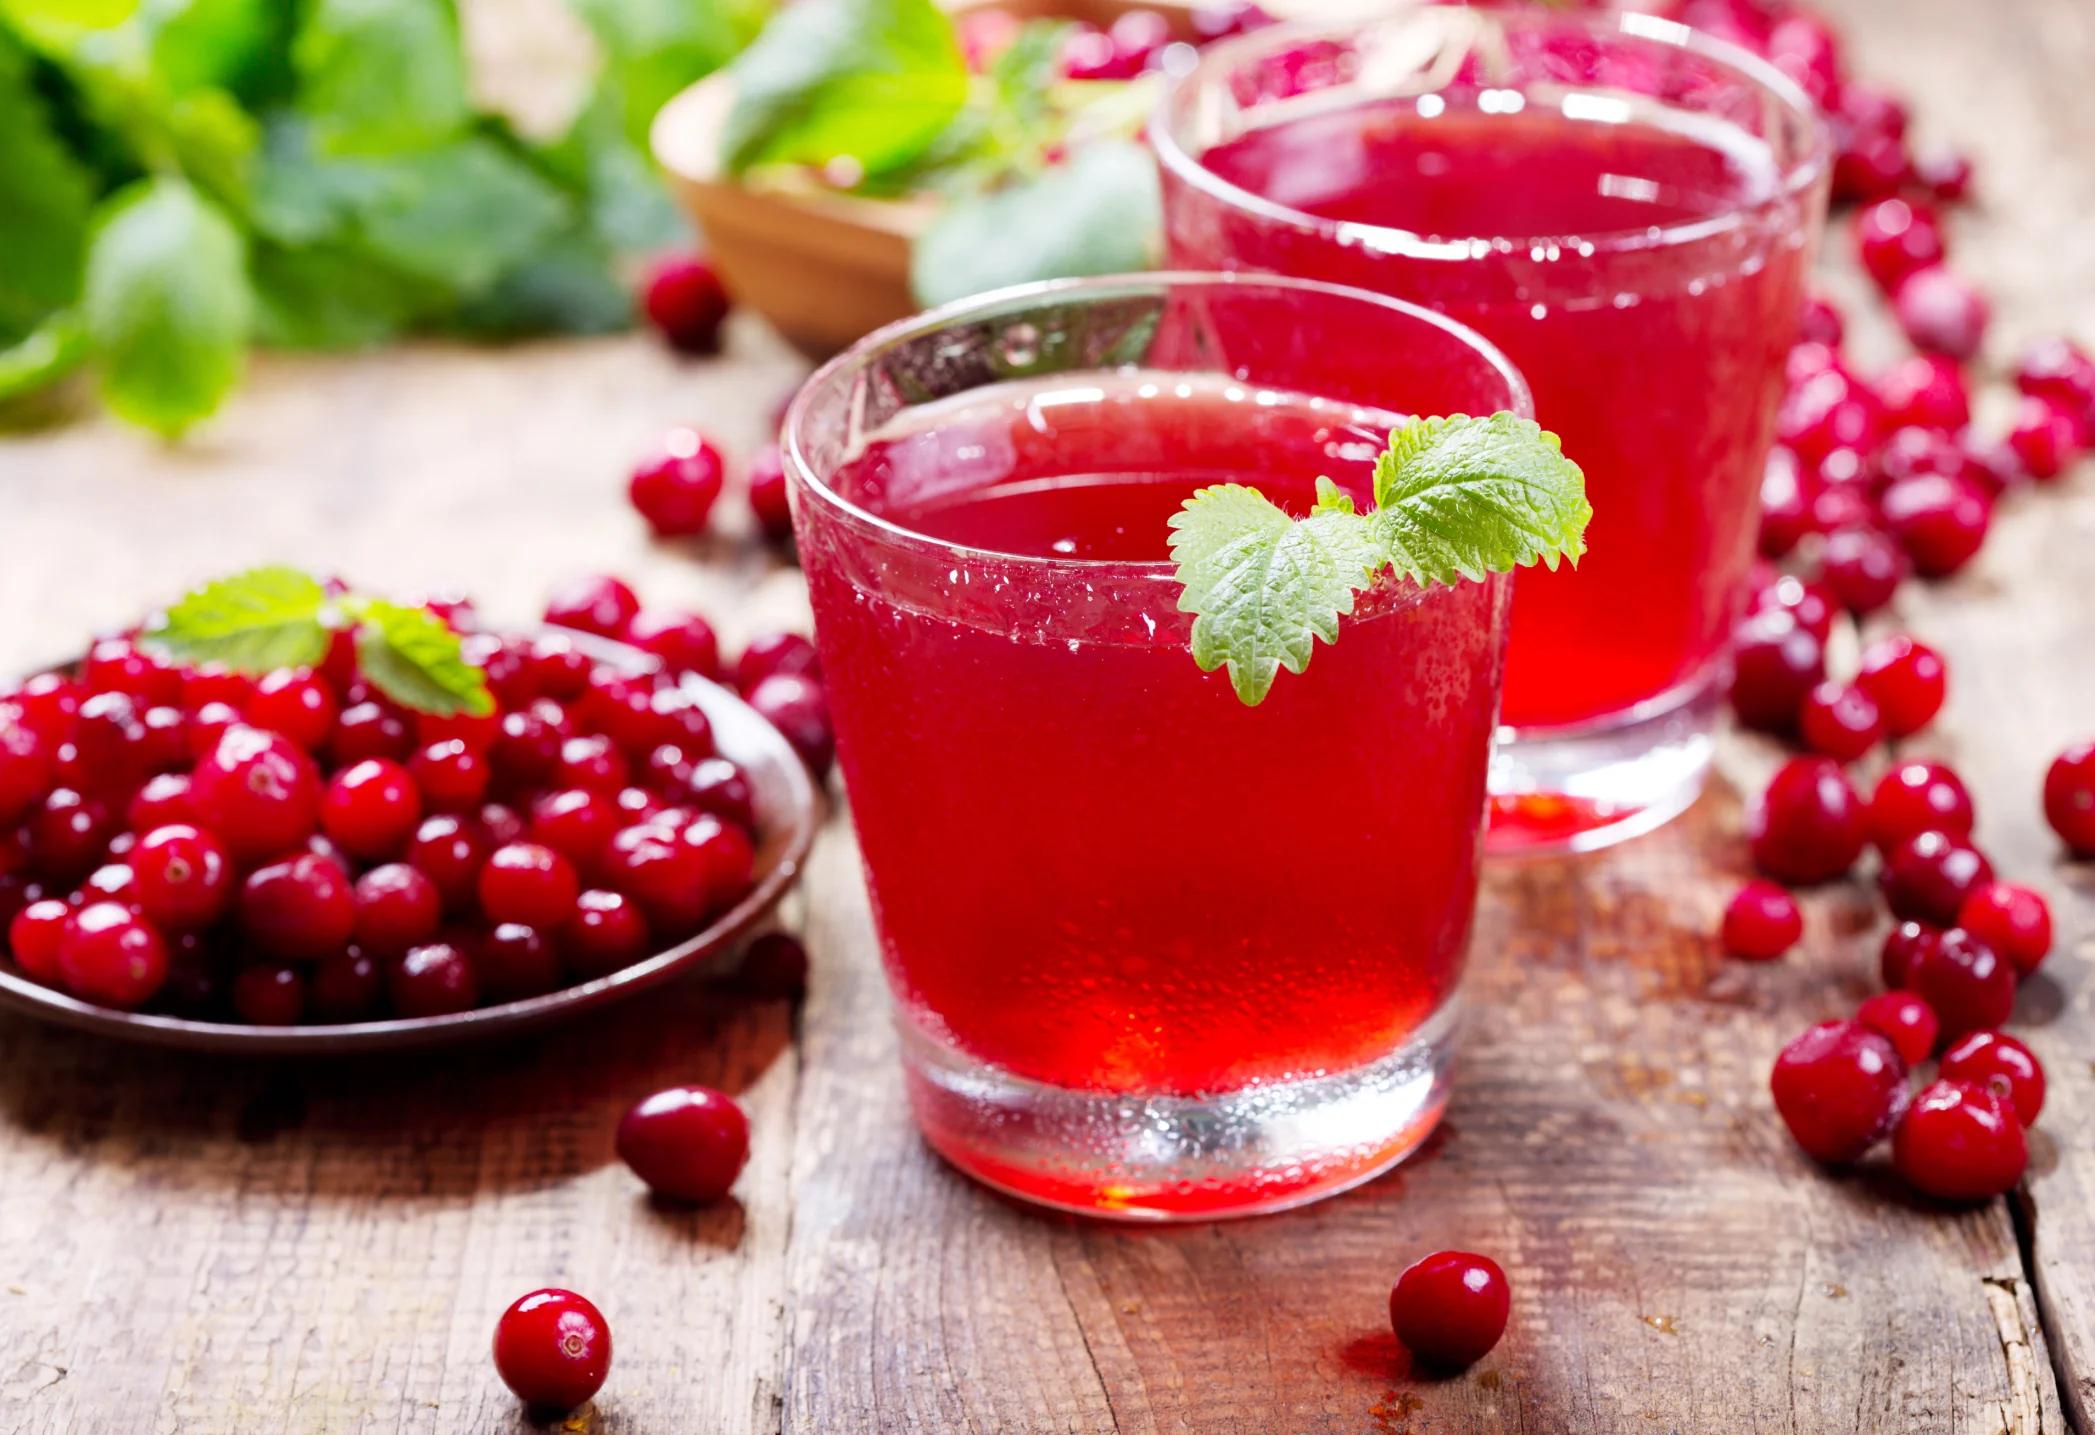 What Alcohol Goes with Cranberry Juice